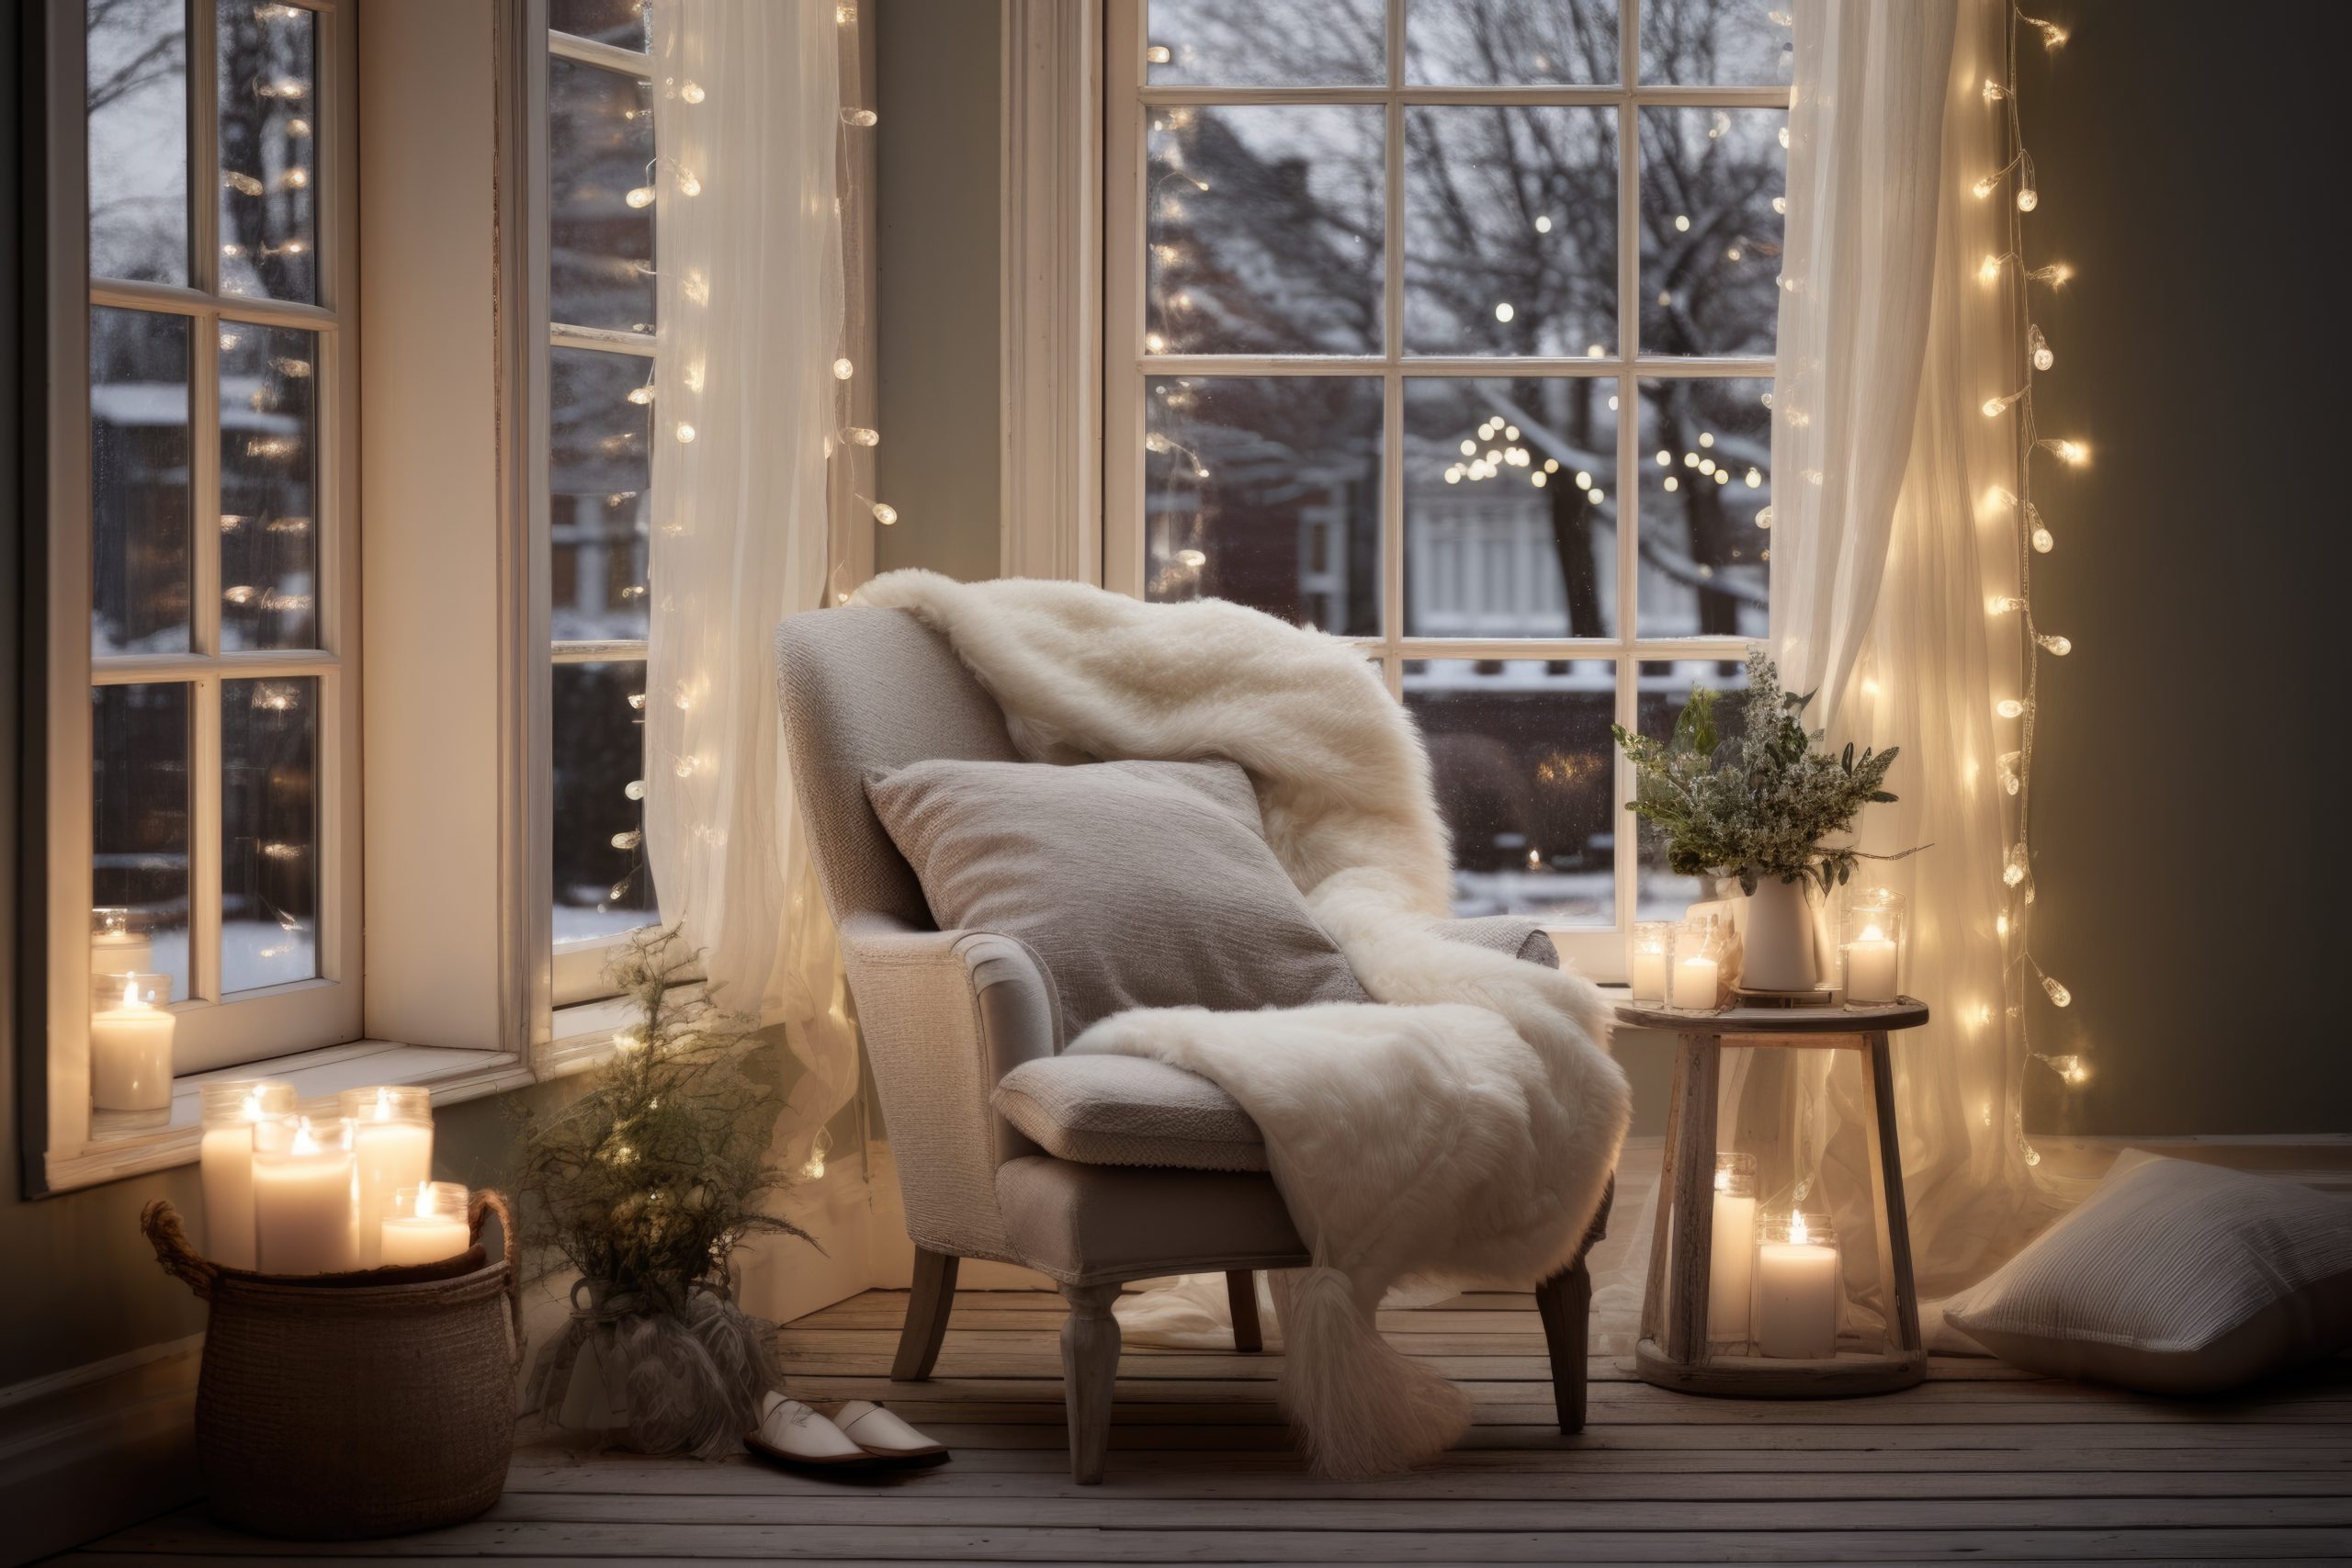 winter home decor ideas; layered lighting behind curtains in a living room and lit candles scattered around